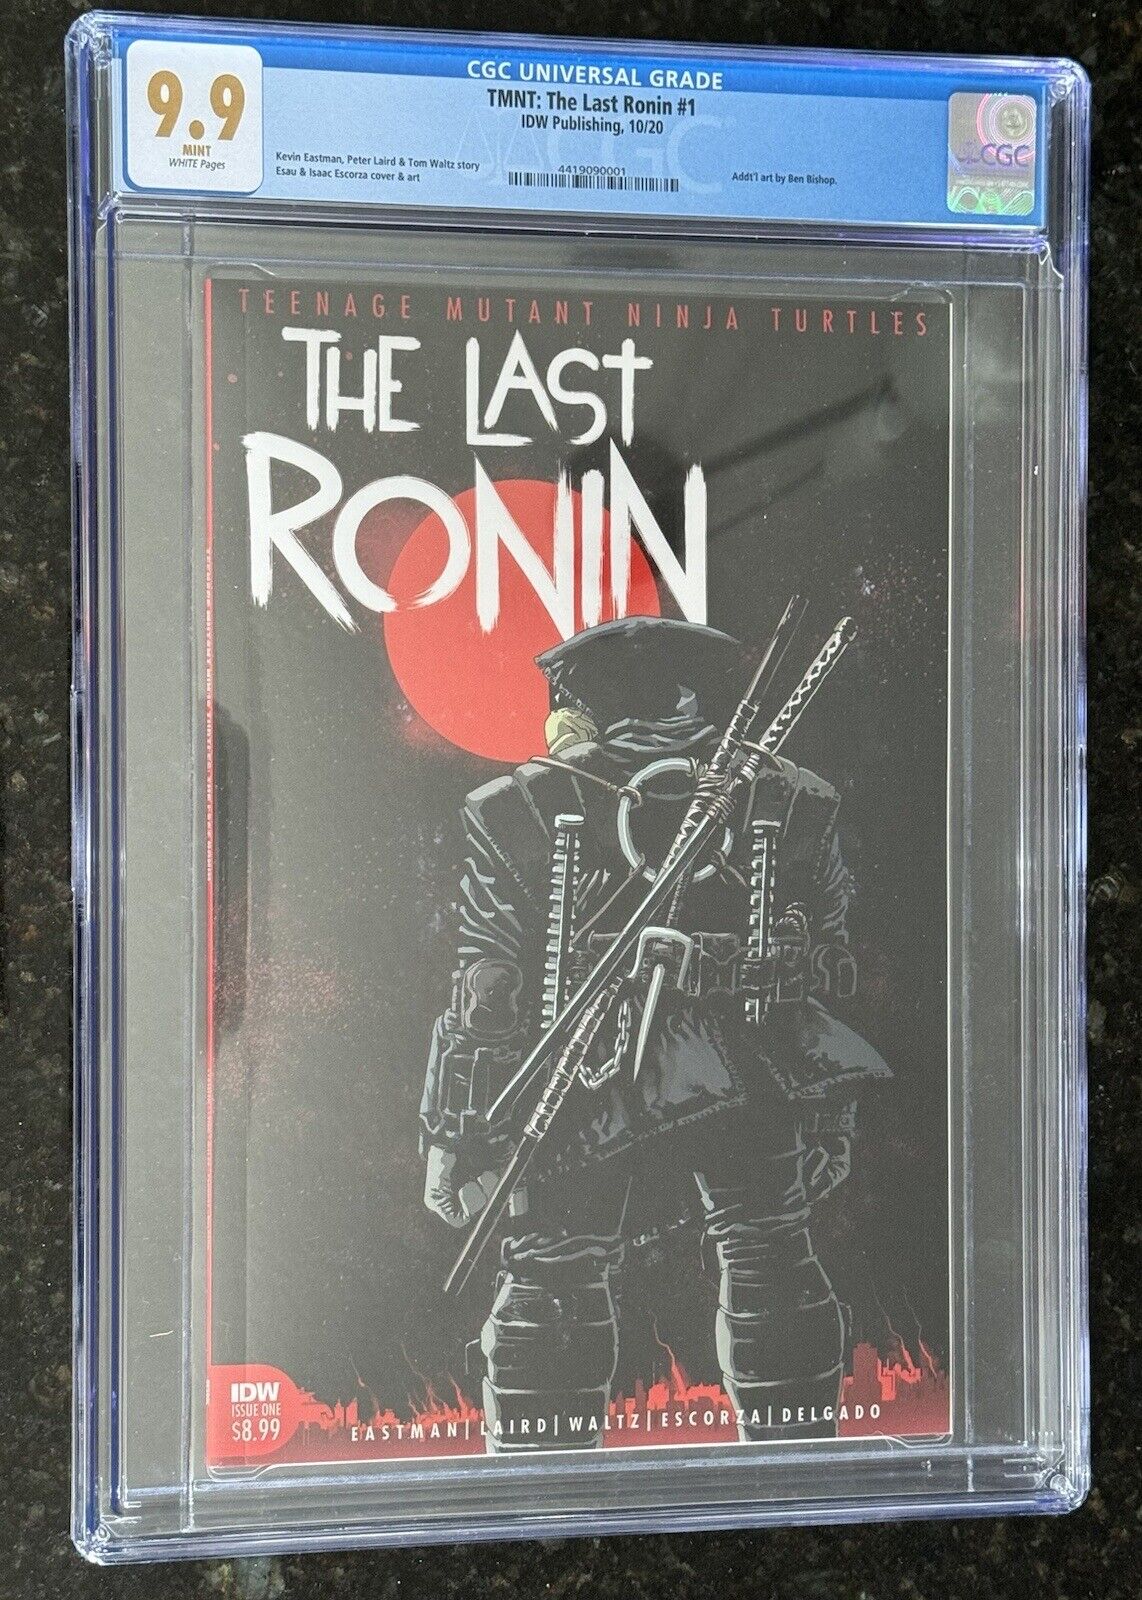 TMNT The Last Ronin #1 CGC 9.9 Cover A 1st Print